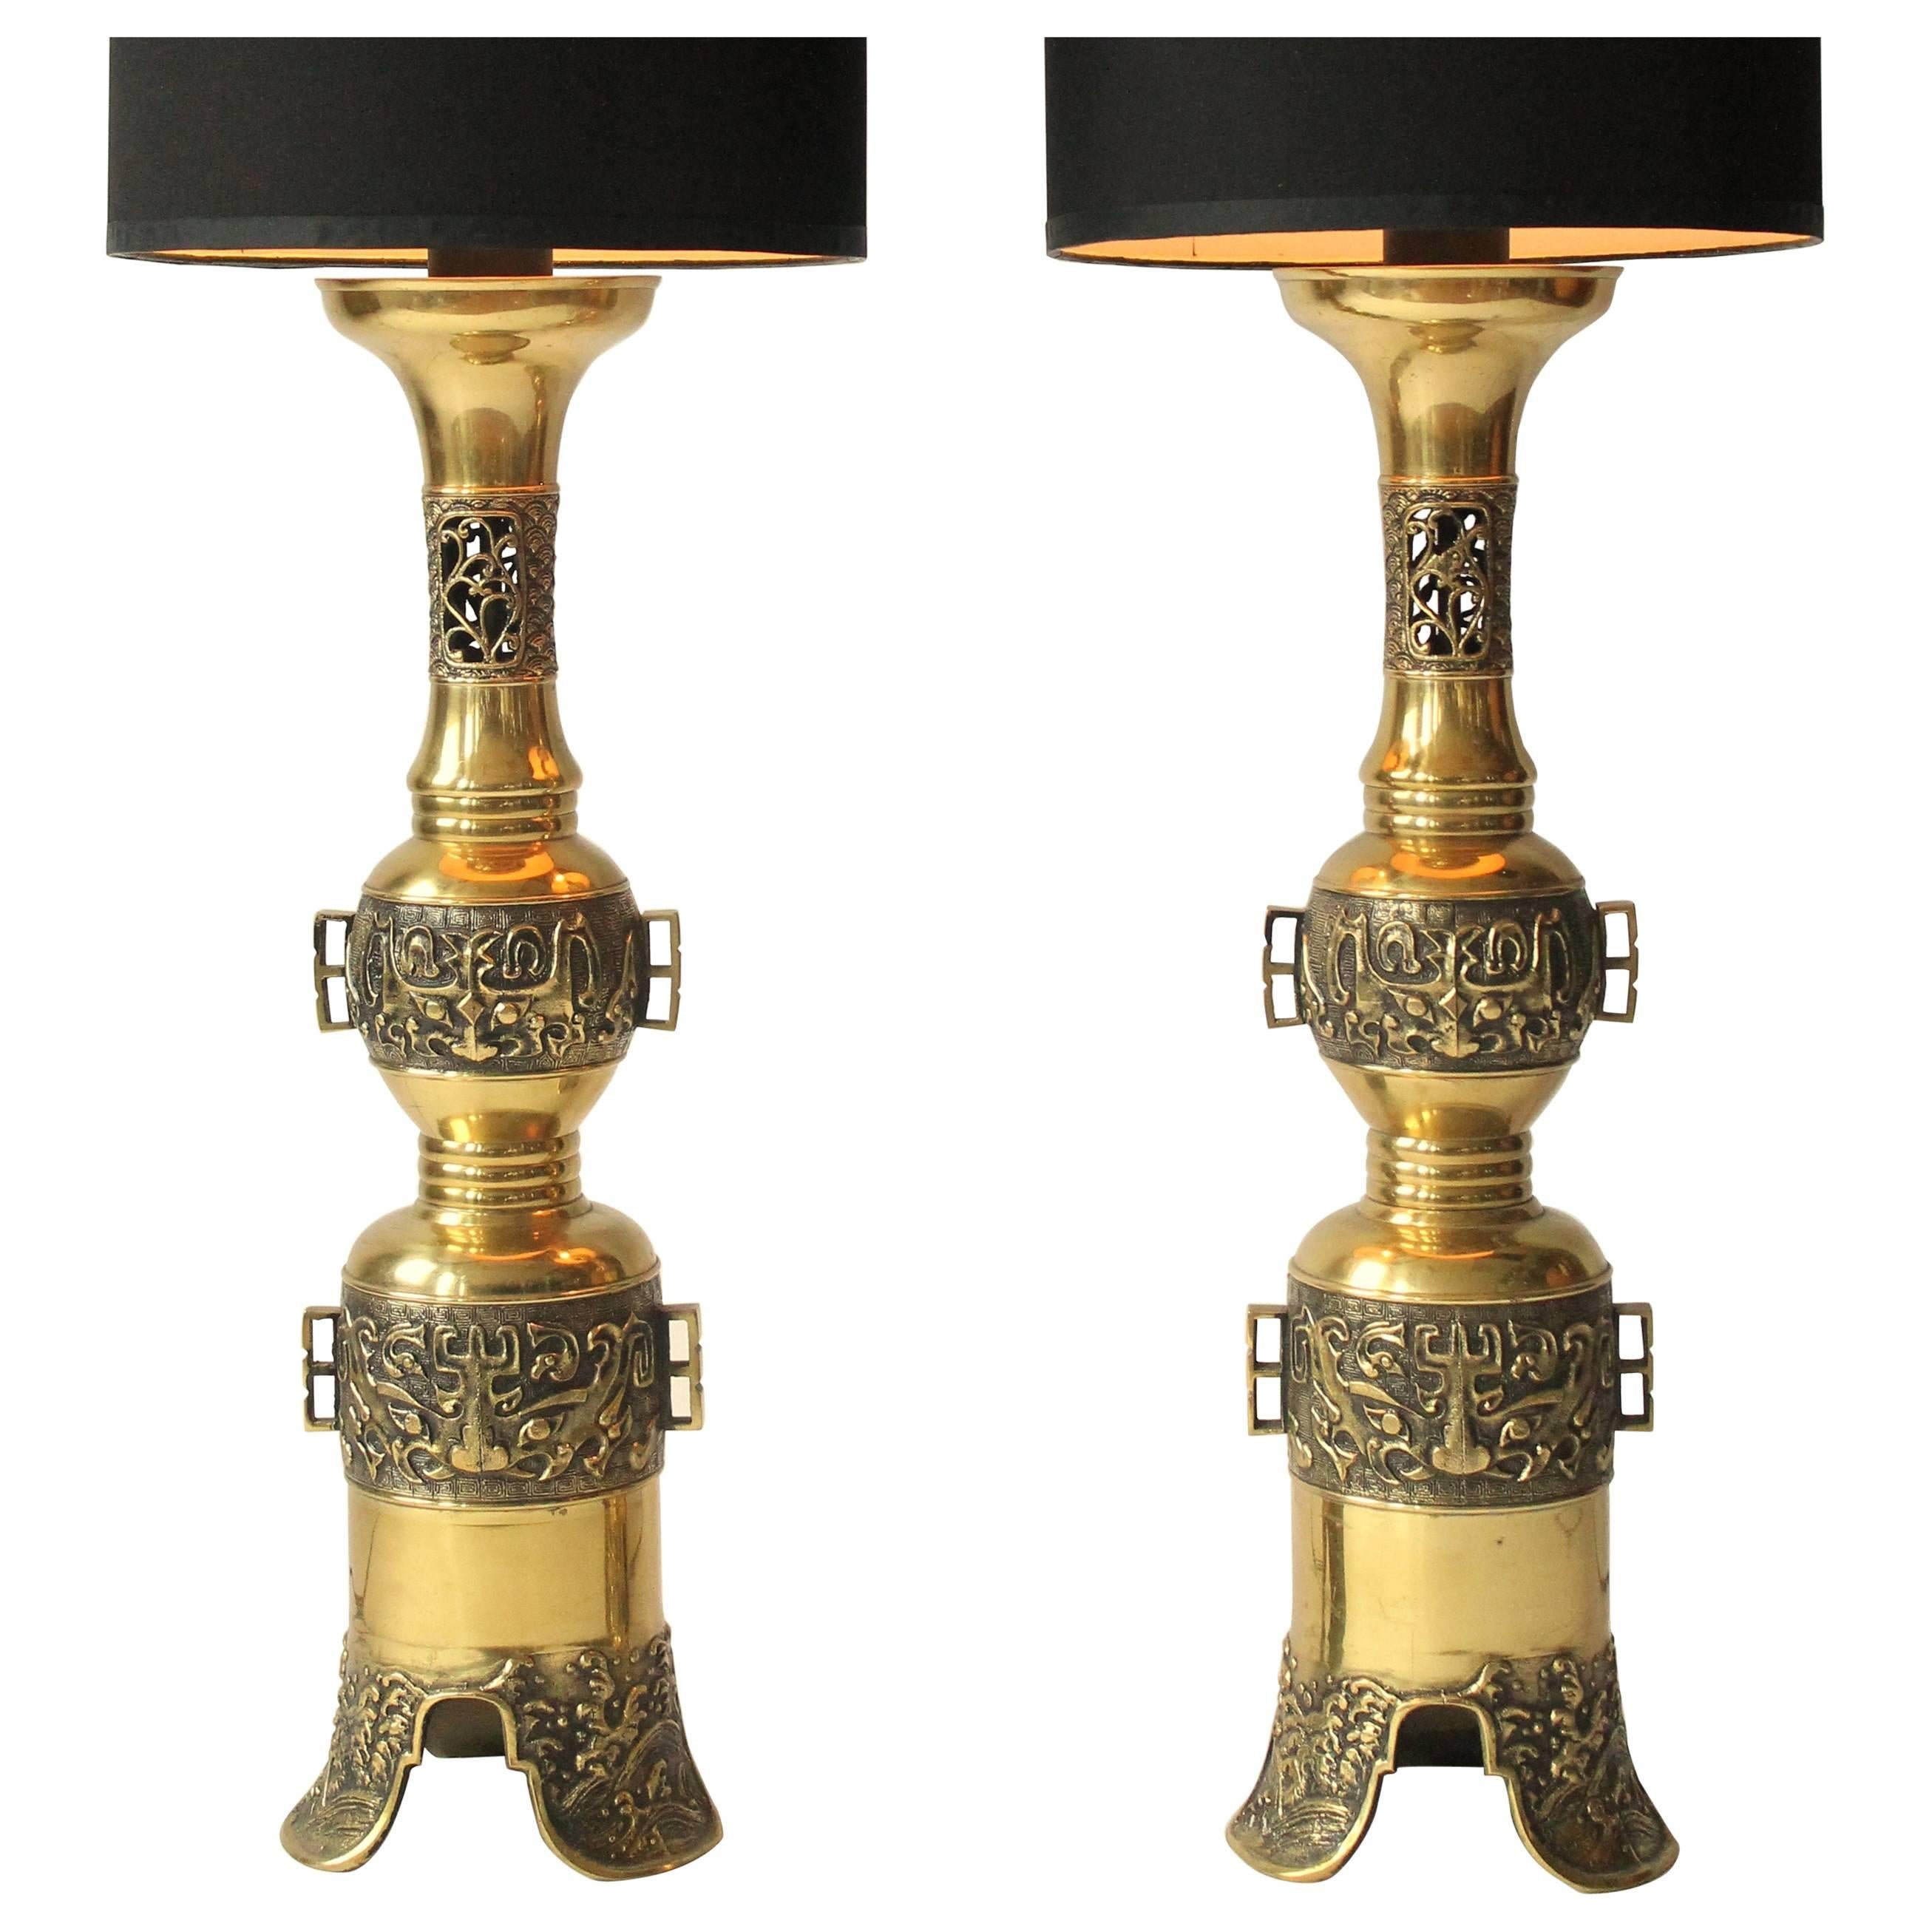 2 Massive Finely Casted James Mont  Brass Table Lamps, 1960s , USA